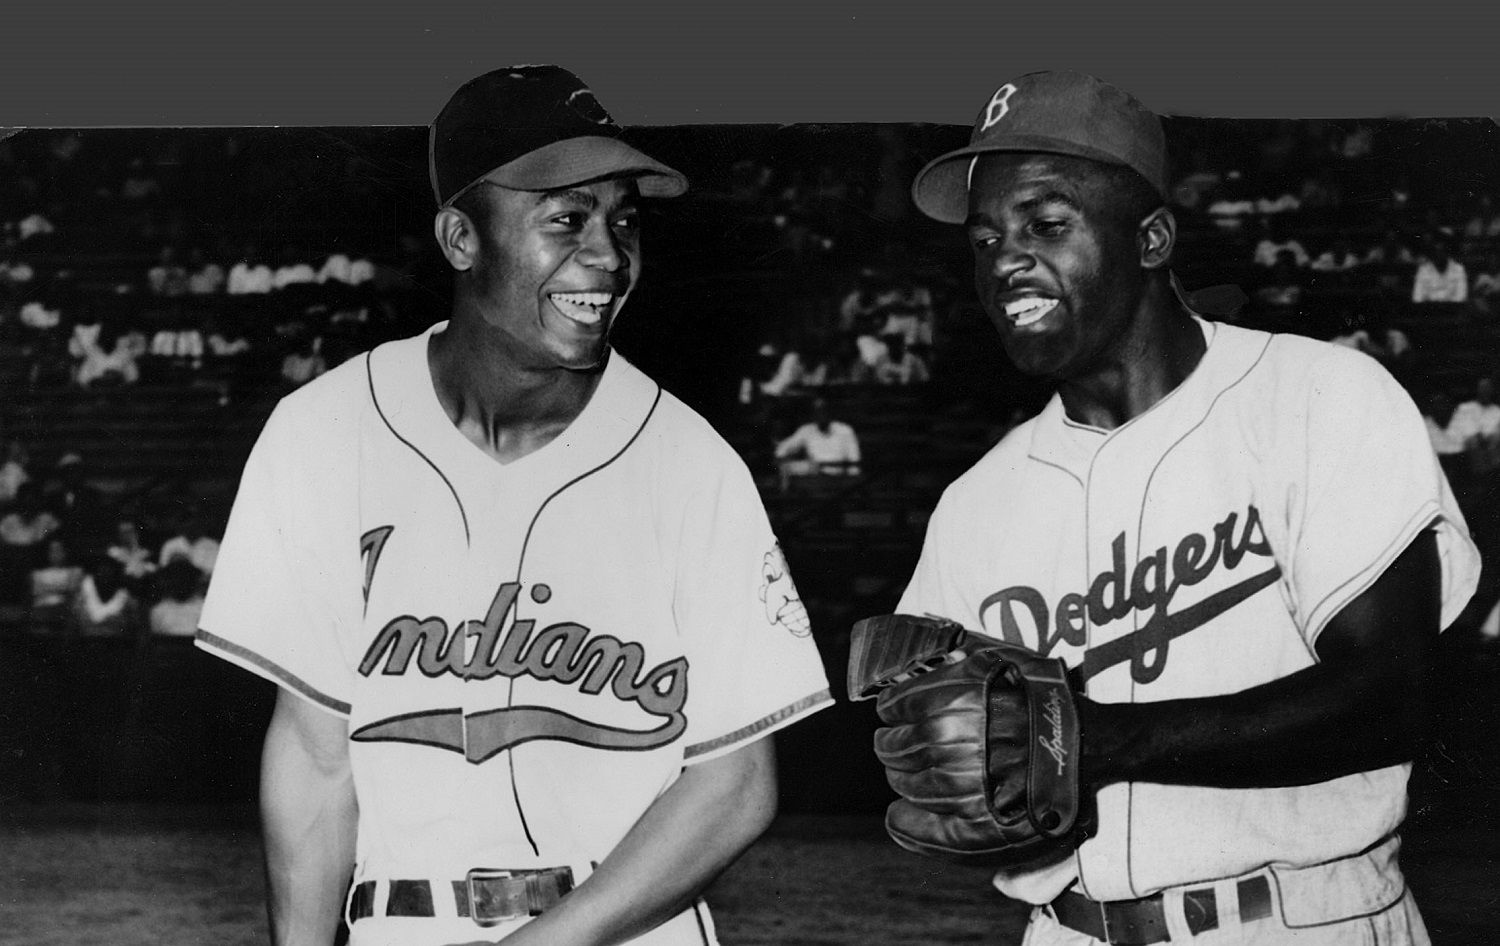 Larry Doby and Jackie Robinson